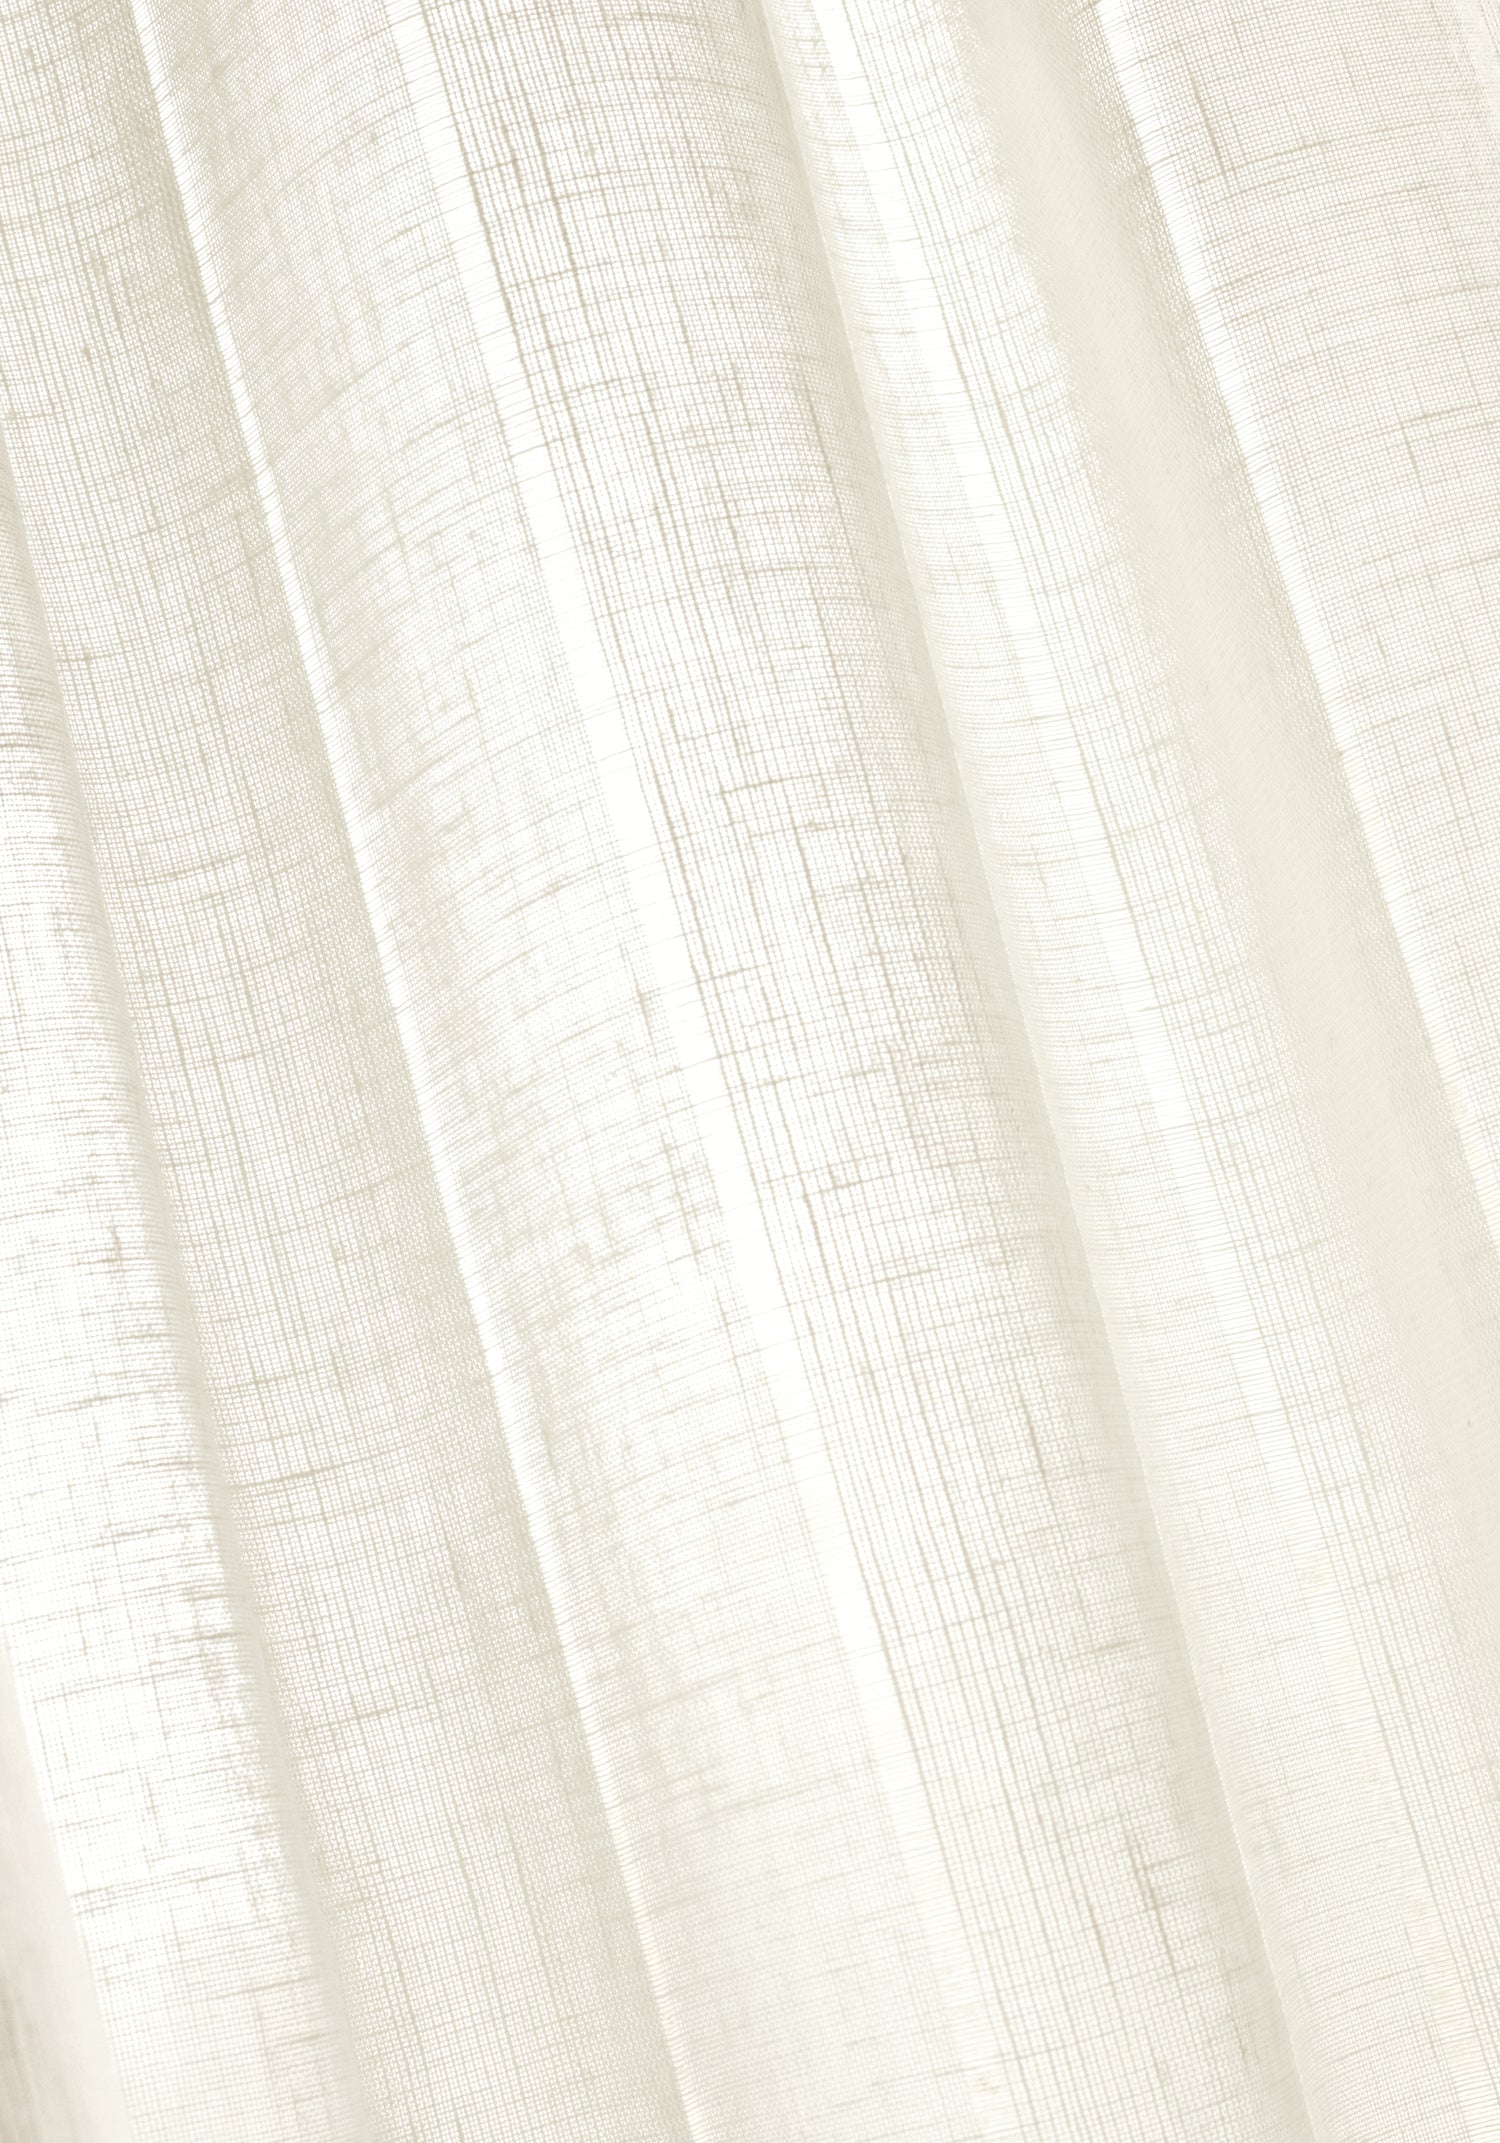 Up close sheer in Erba Stripe fabric in ivory color - pattern number FWW8242 - by Thibaut in the Aura collection